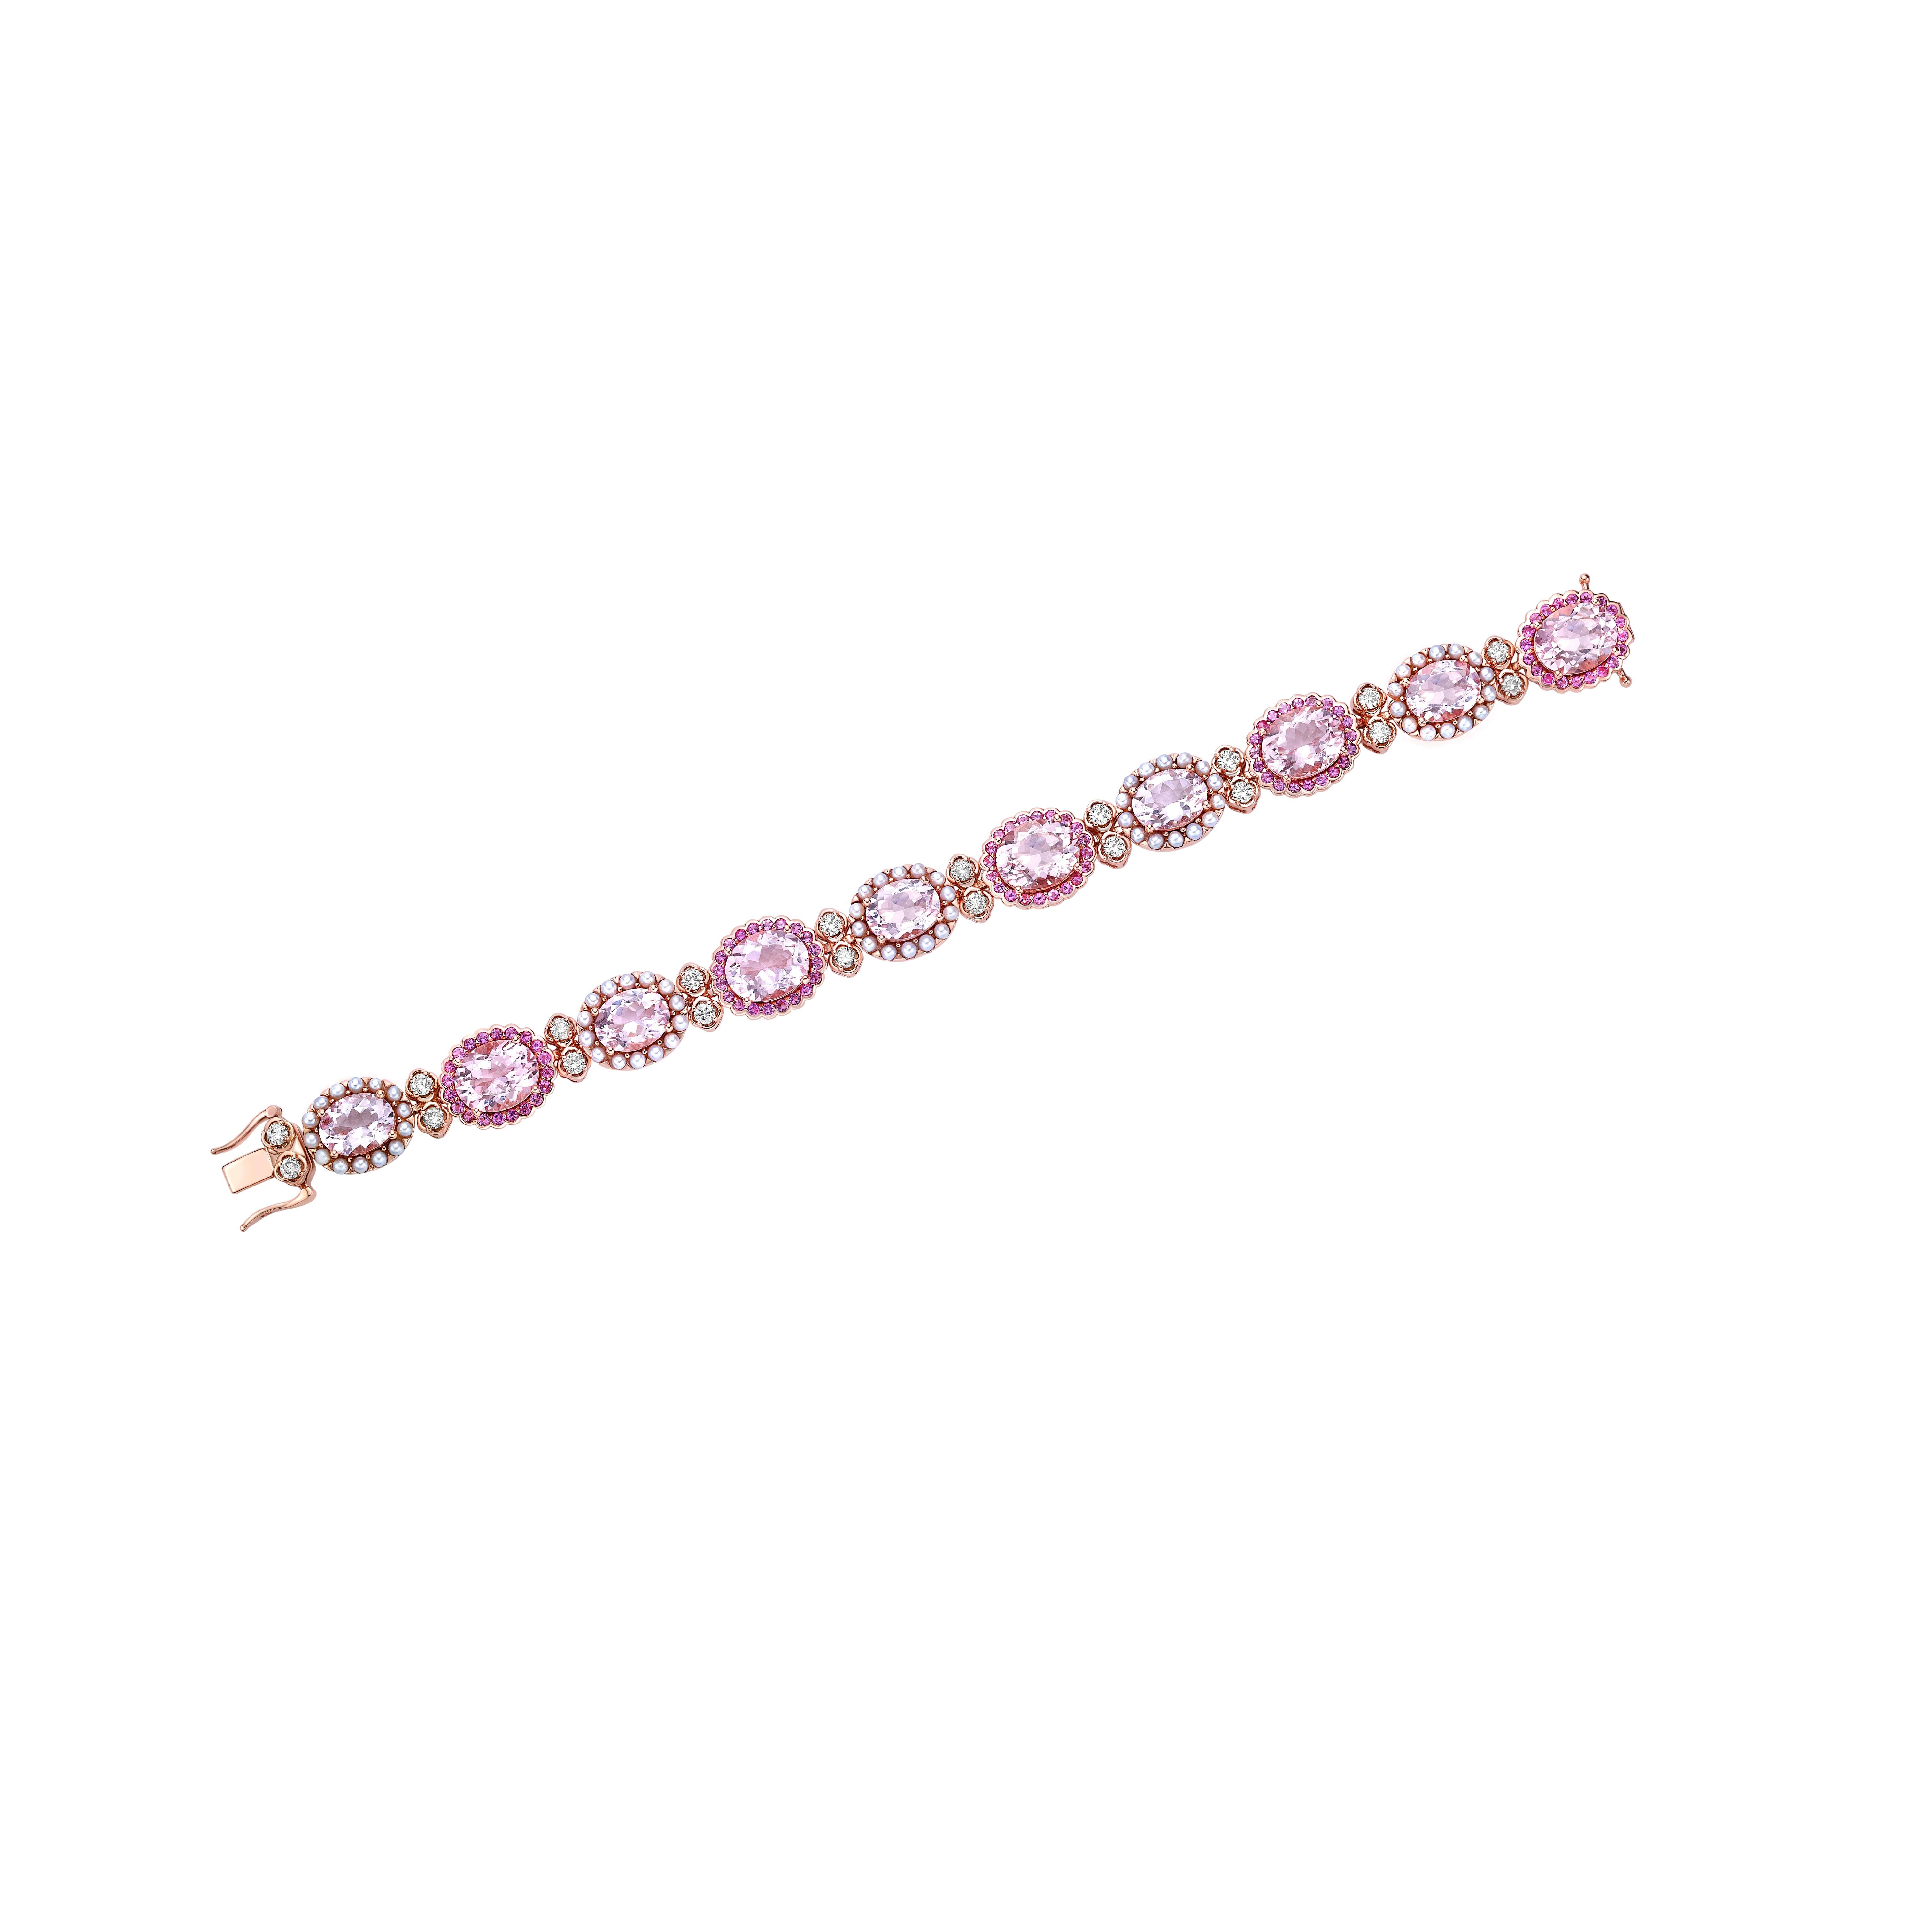 Our Cherry Blossom collection uniquely pairs these pretty pink morganites with a combination of pearls, pink tourmalines and diamonds. Set in rose gold this collection is elegant and classy with any look. 

Pink Morganite Bracelet with Tourmaline,